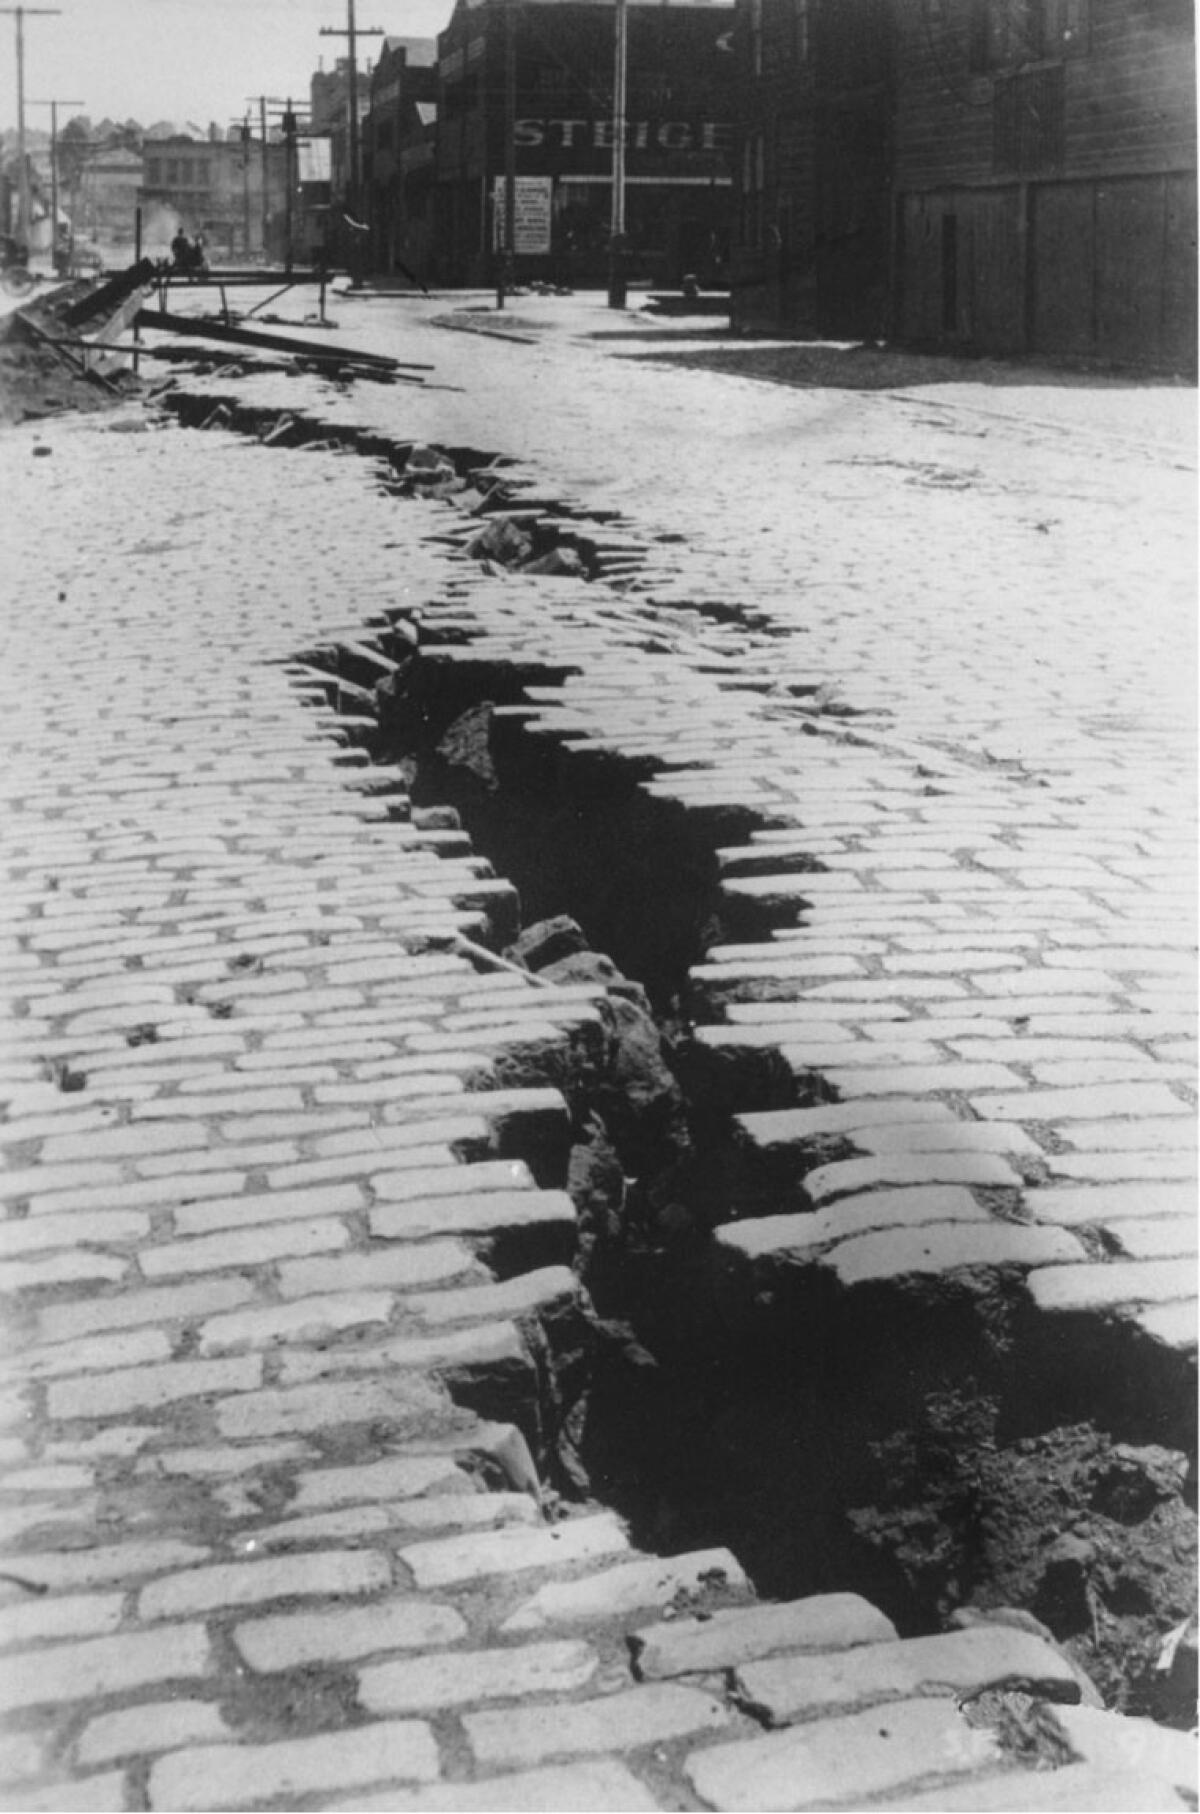 Buckled pavement and curbstones from the earthquake on April 18, 1906, in San Francisco.